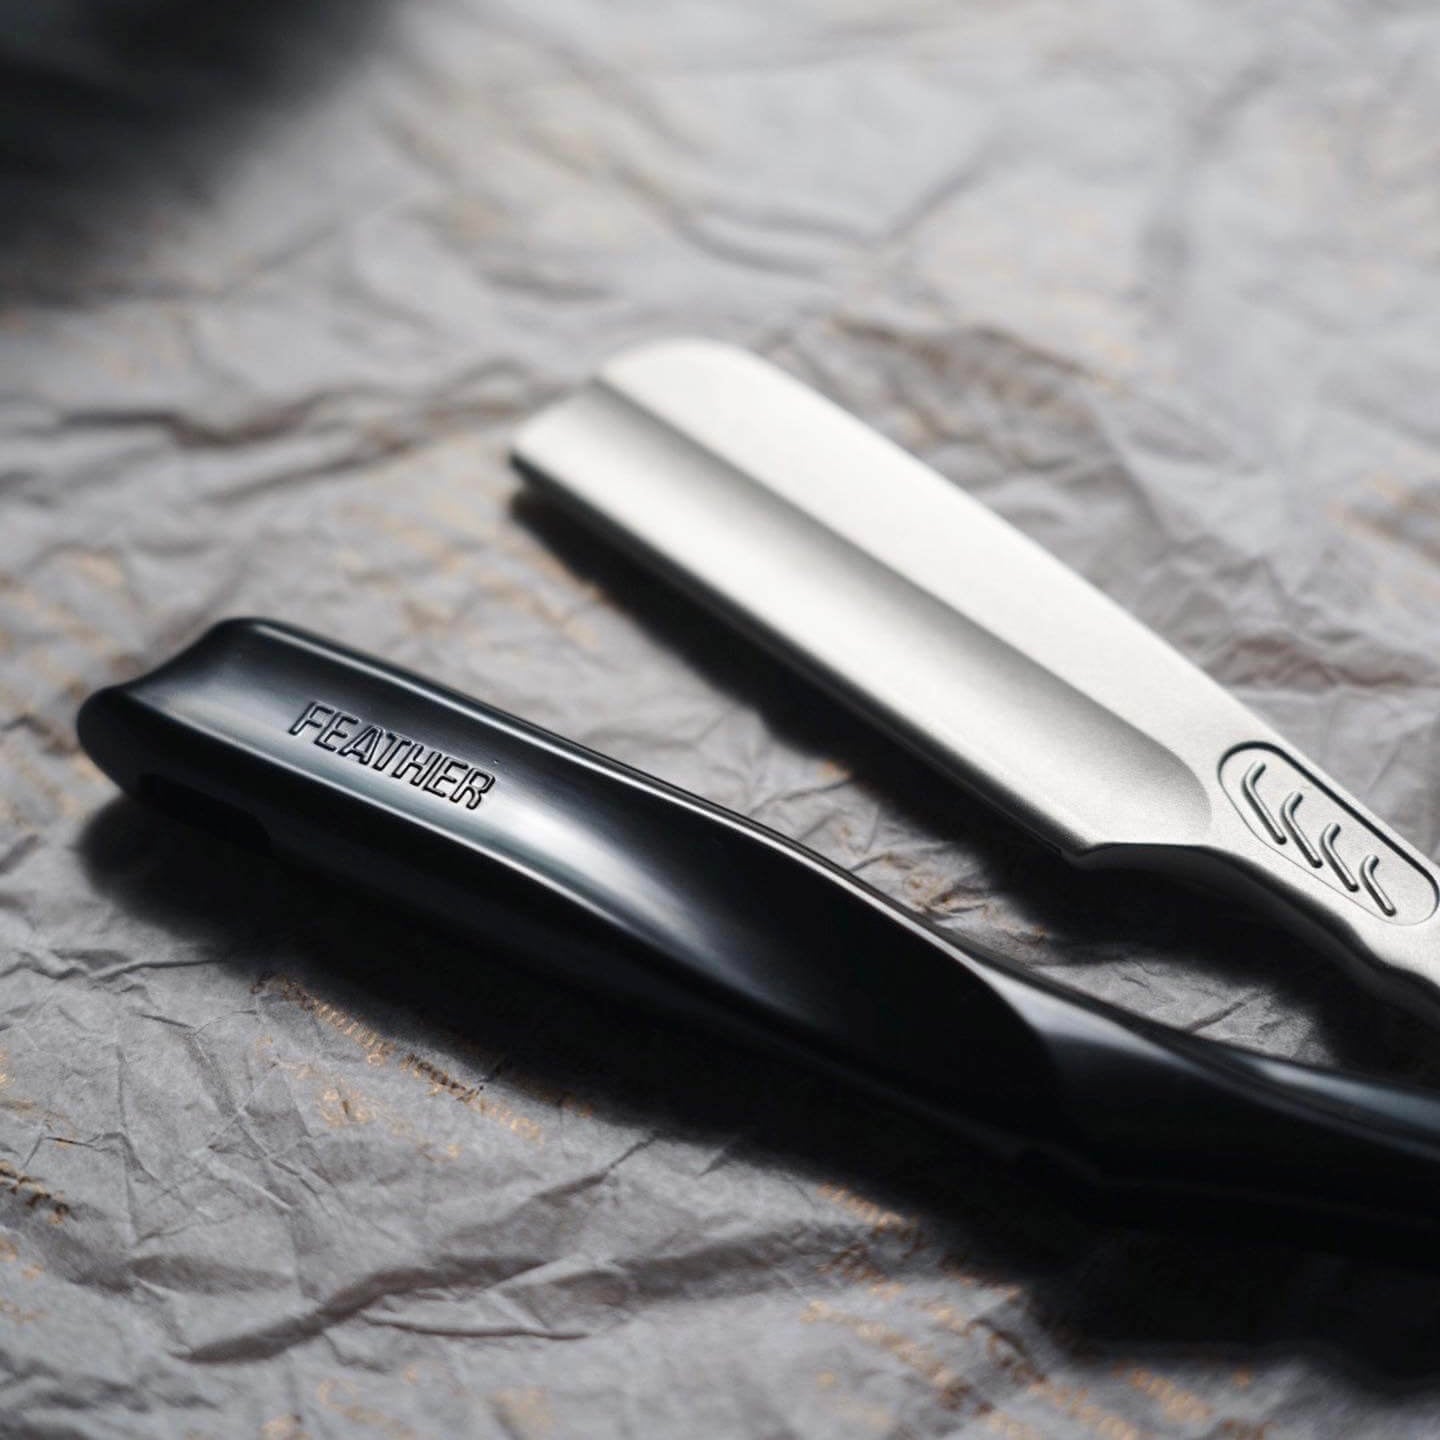 Japan's Feather Artist Club SS straight shaver is a gentle entry-level model for beginners